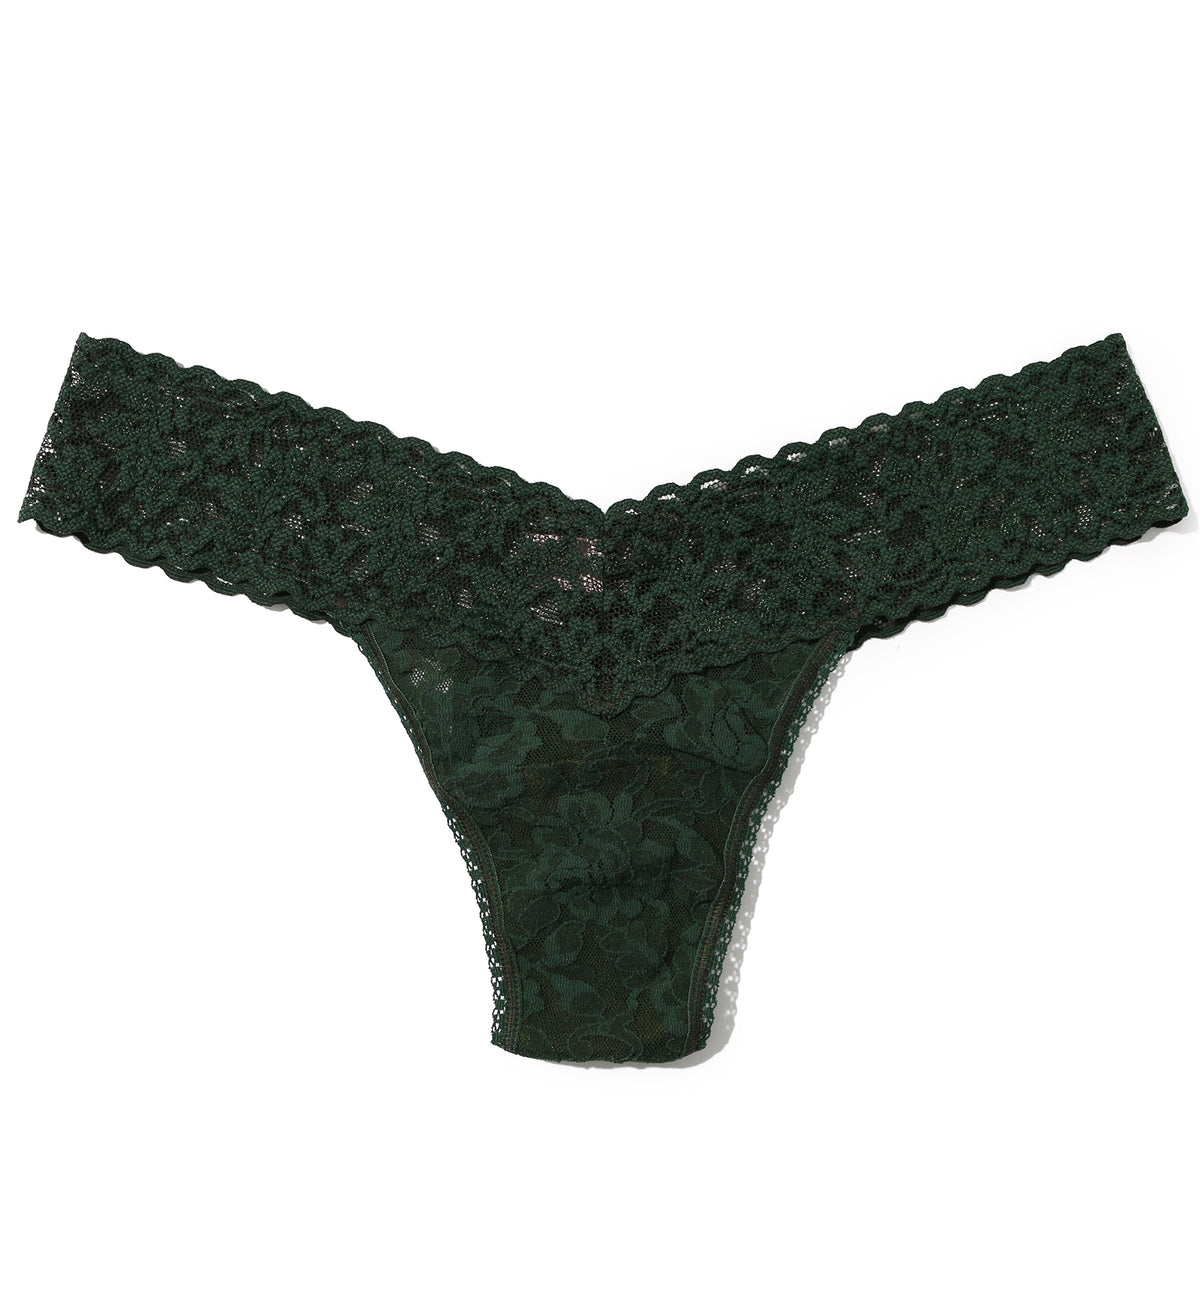 Hanky Panky Signature Lace Low Rise Thong (4911P),Vines - Vines,One Size